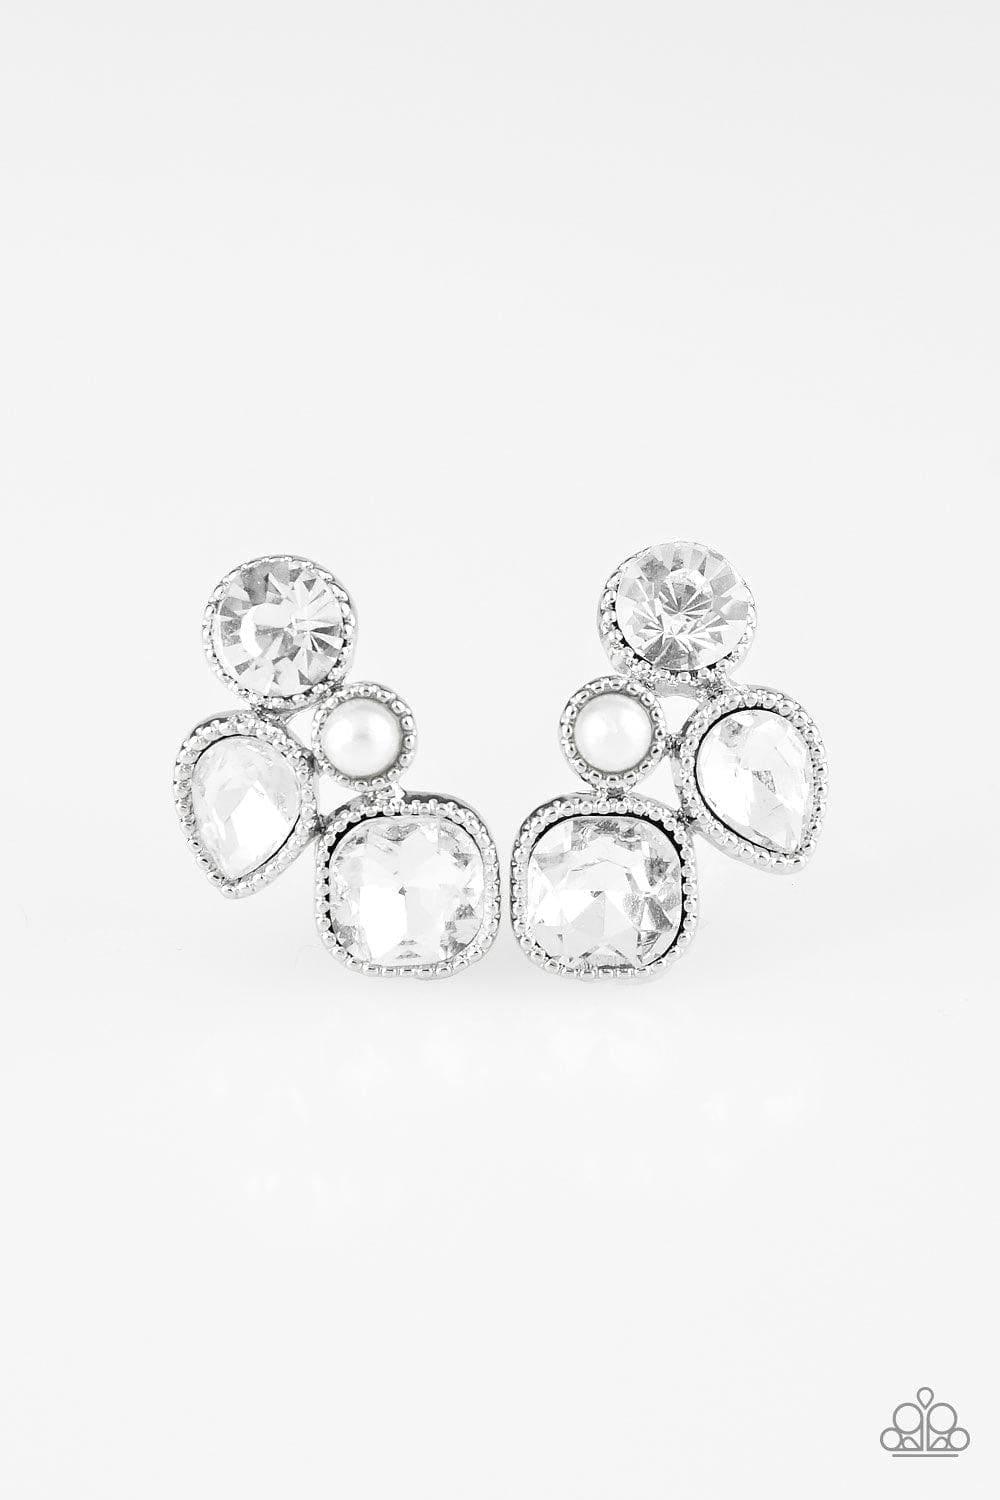 Paparazzi Accessories - Super Superstar - White Post Earrings - Bling by JessieK